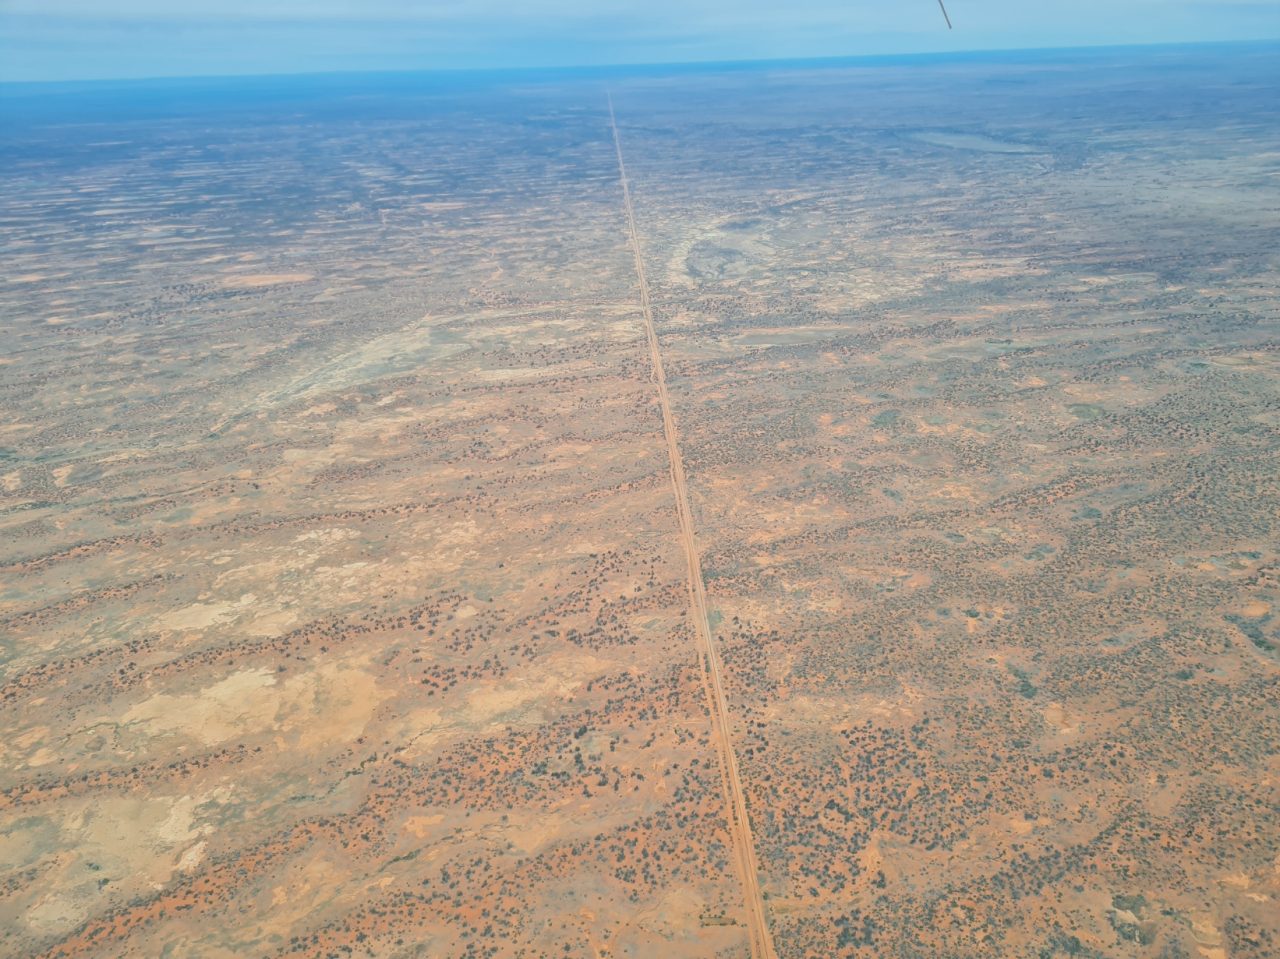 Aerial photo of outback desert landscape a long straight border line dissecting the left and right of the image. 